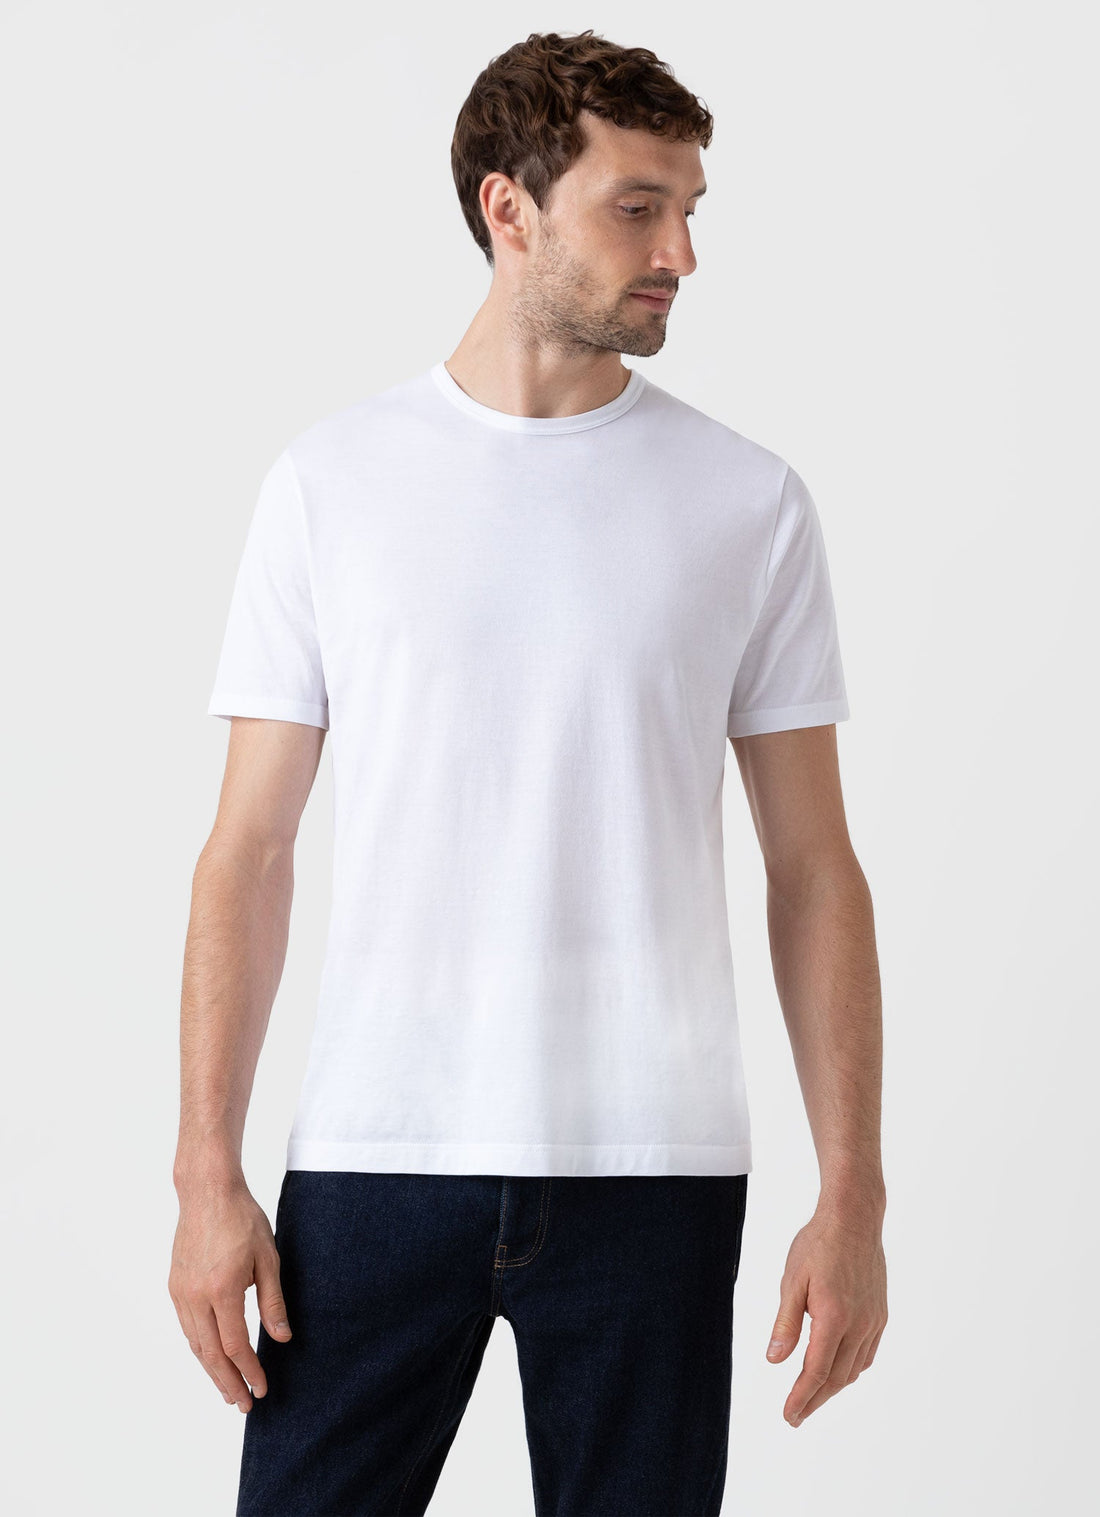 T-Shirts, Shop Must-have Fashion T-Shirts Online